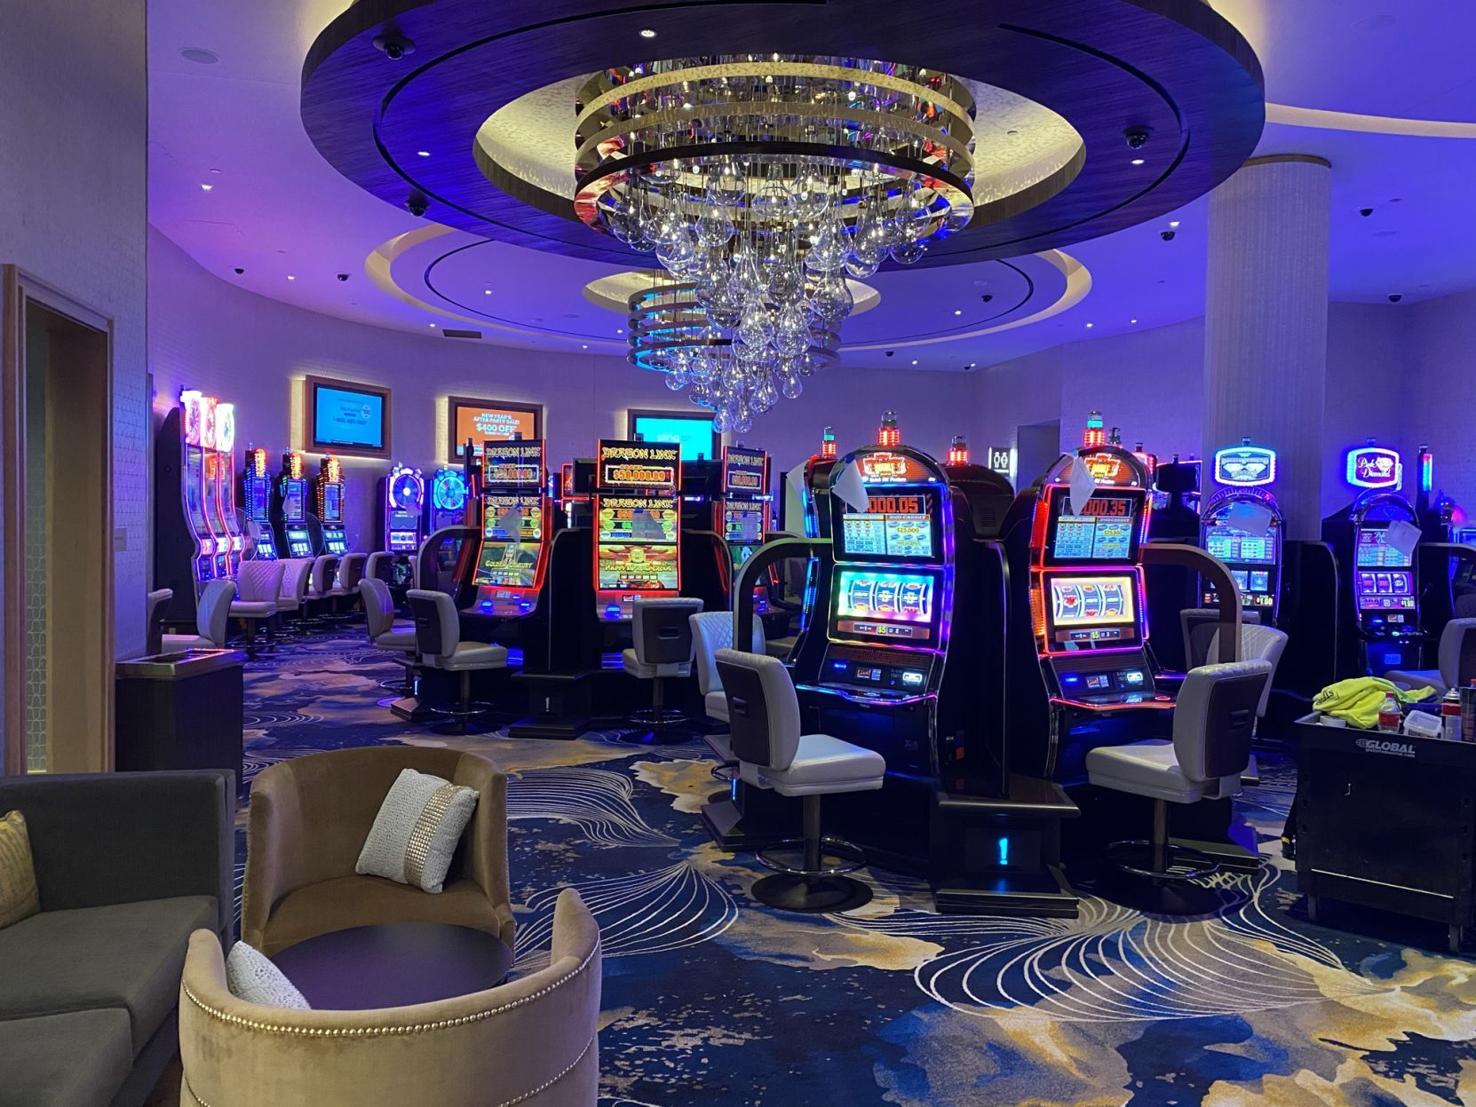 GALLERY: A sneak peek at Philly's new Live! Casino ...